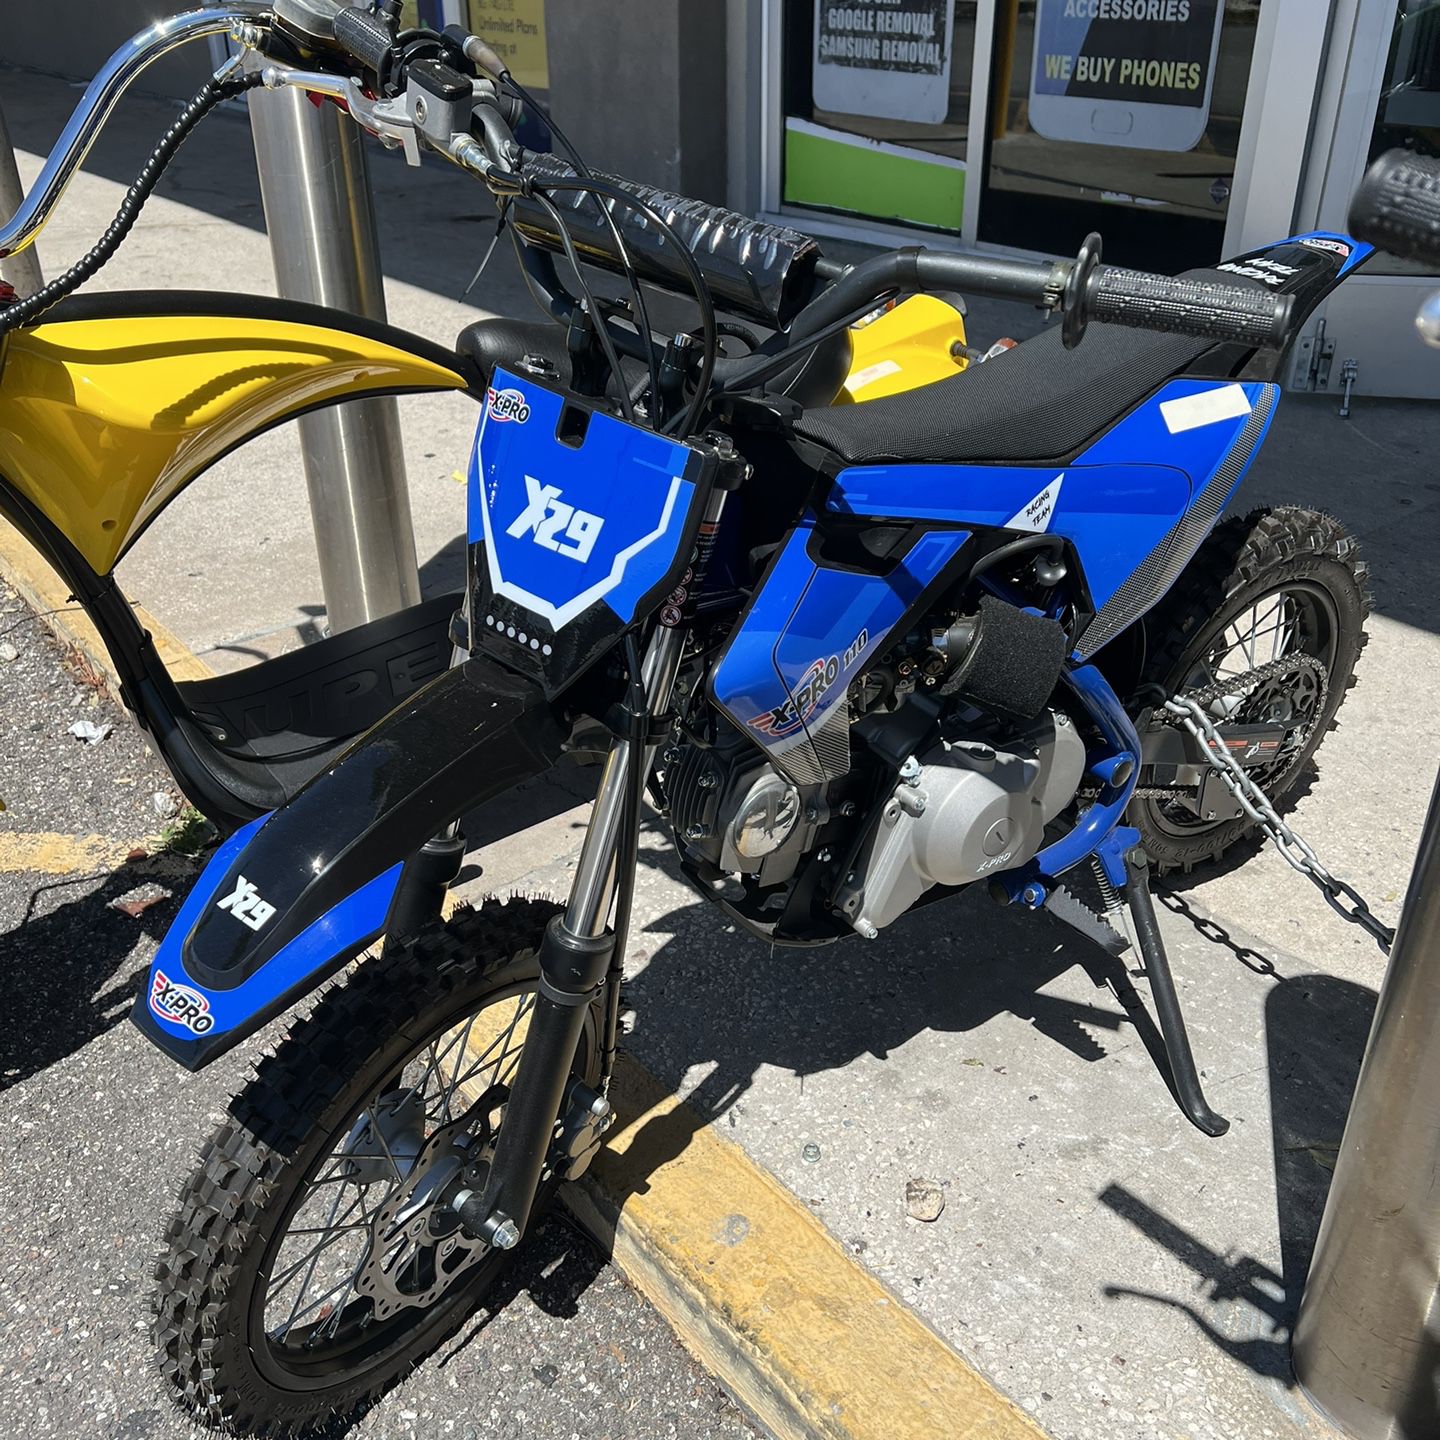 X Pro 110cc Bike! Finance For $50 Down Payment!